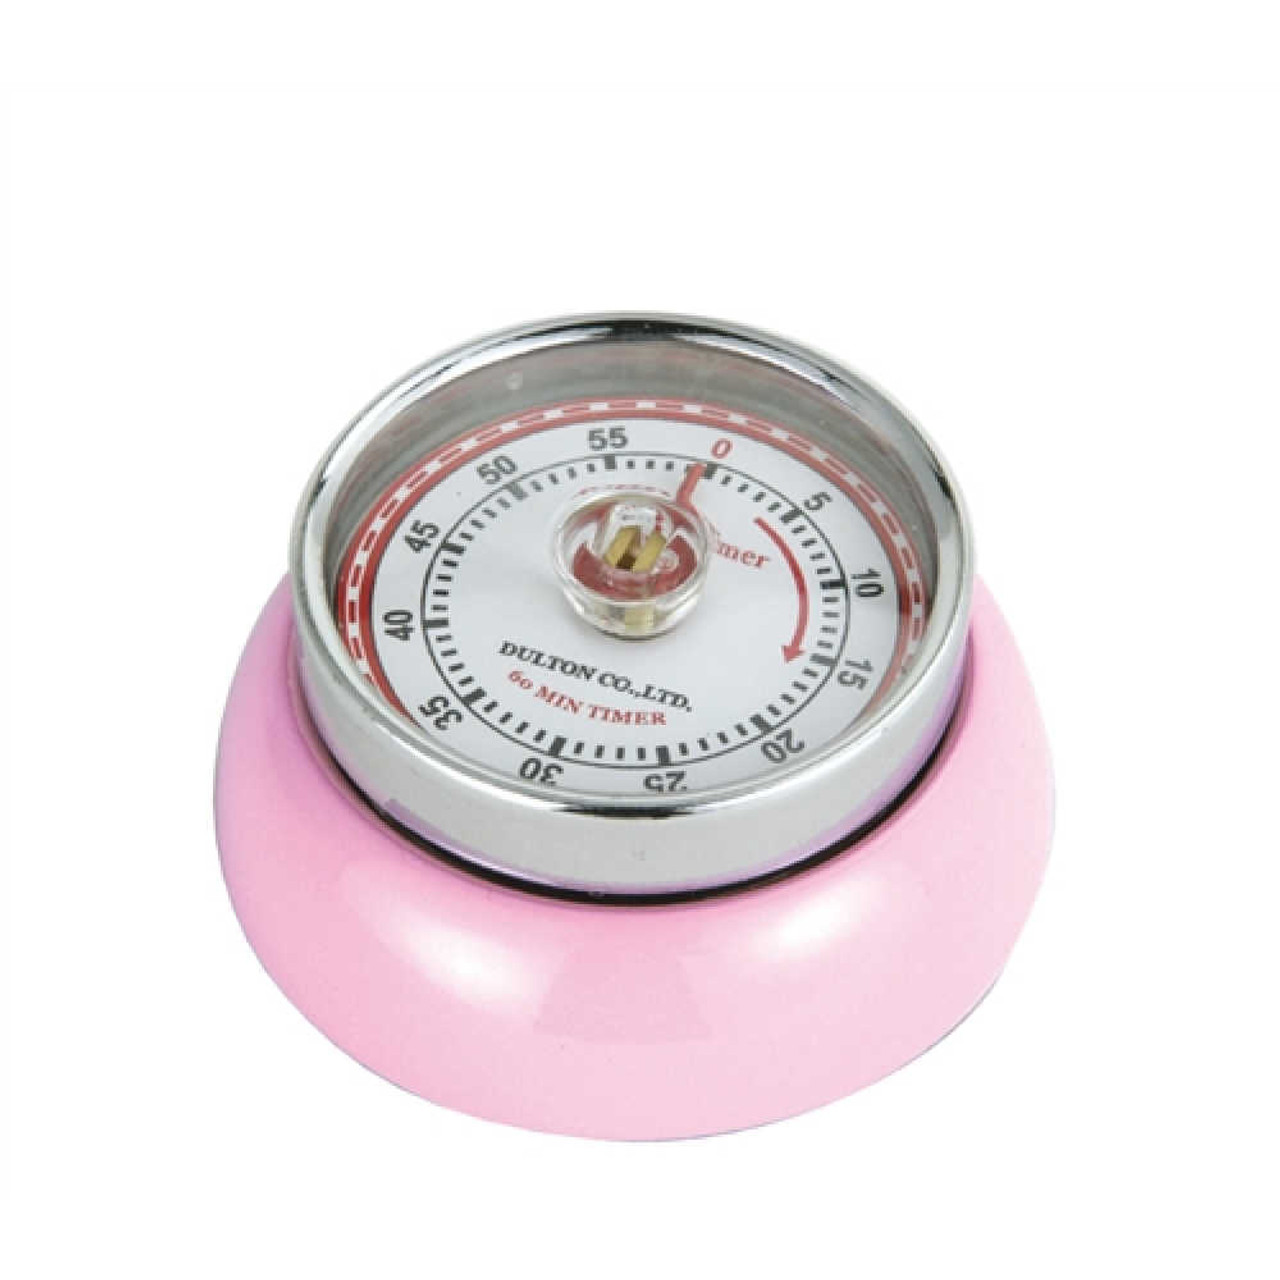 https://cdn11.bigcommerce.com/s-hccytny0od/images/stencil/1280x1280/products/5249/22619/Retro_Kitchen_Timer_Pink__44748.1674788266.jpg?c=2?imbypass=on